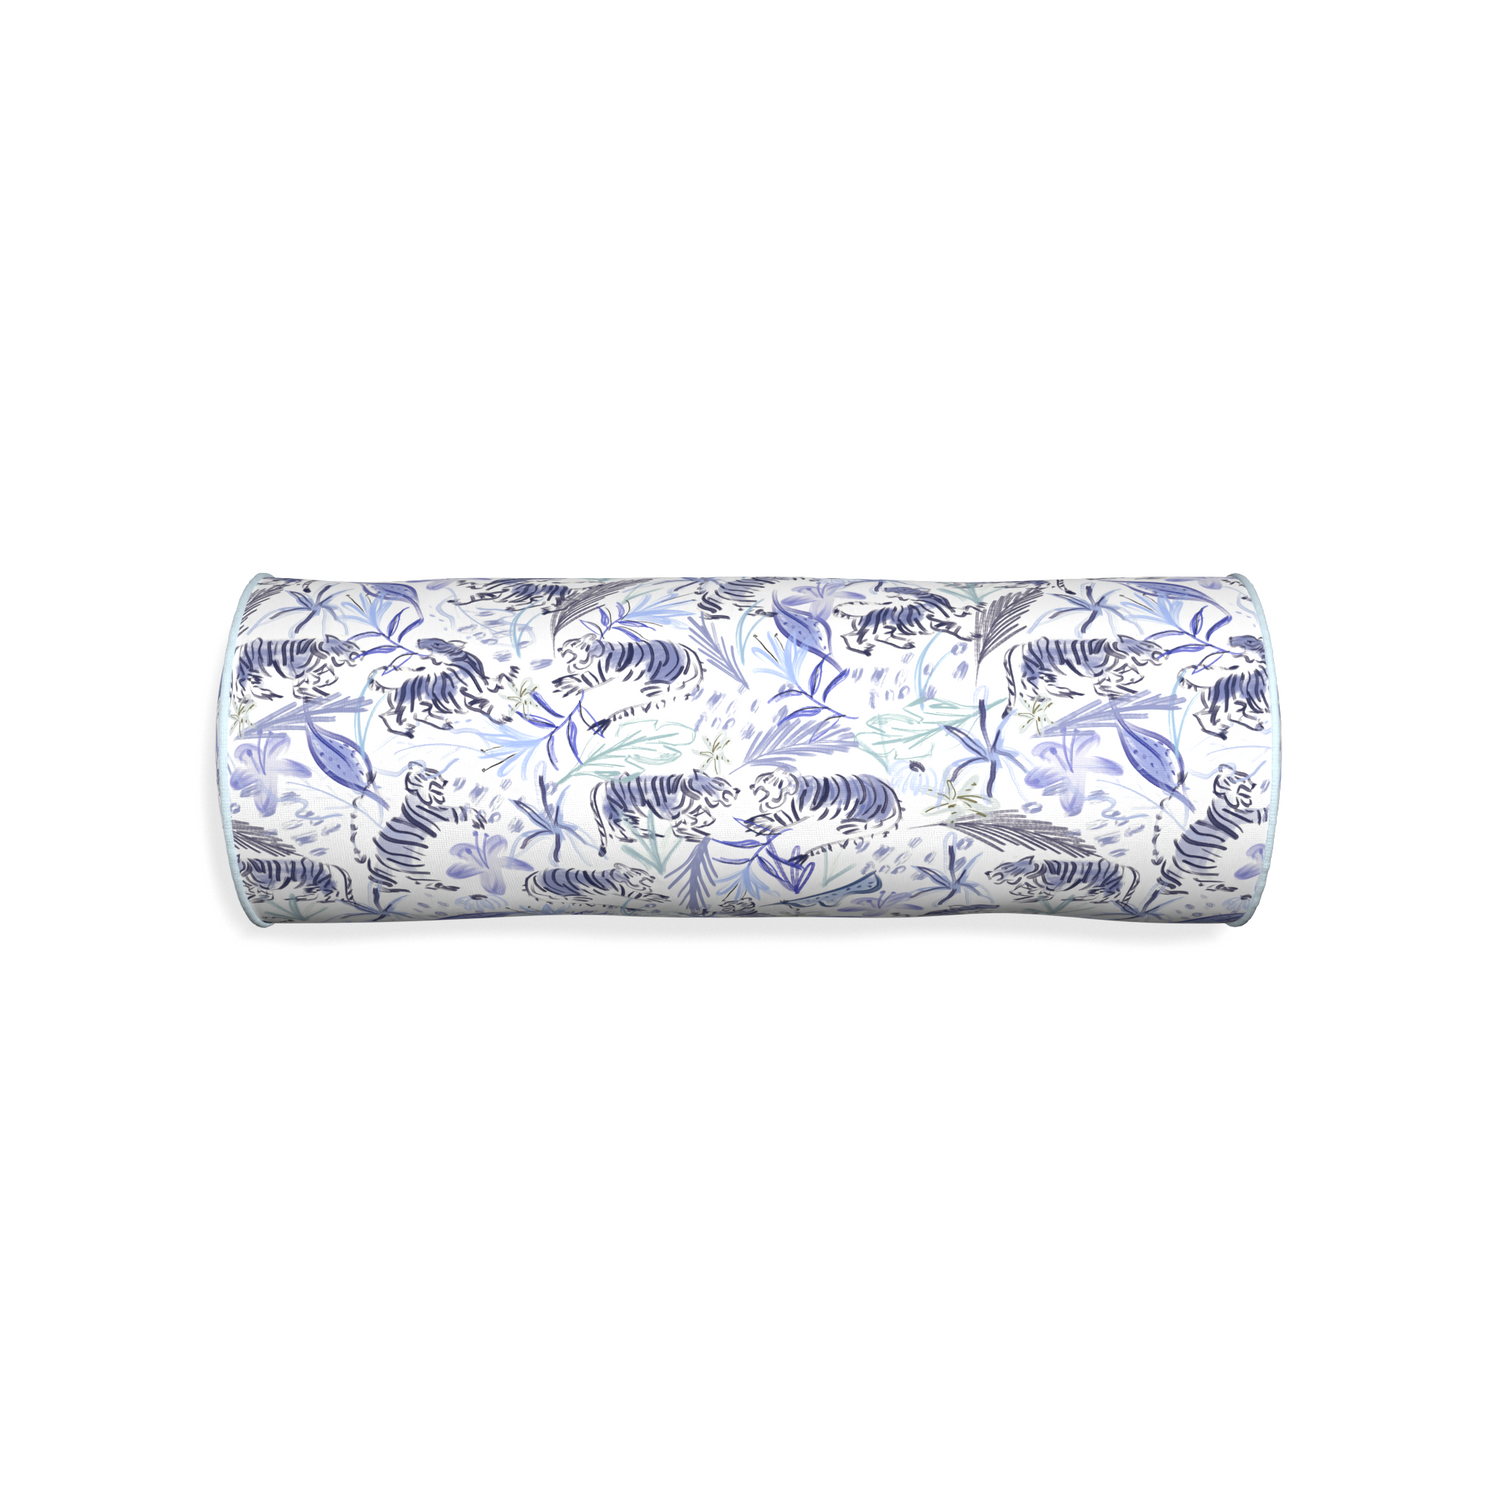 Bolster frida blue custom blue with intricate tiger designpillow with powder piping on white background